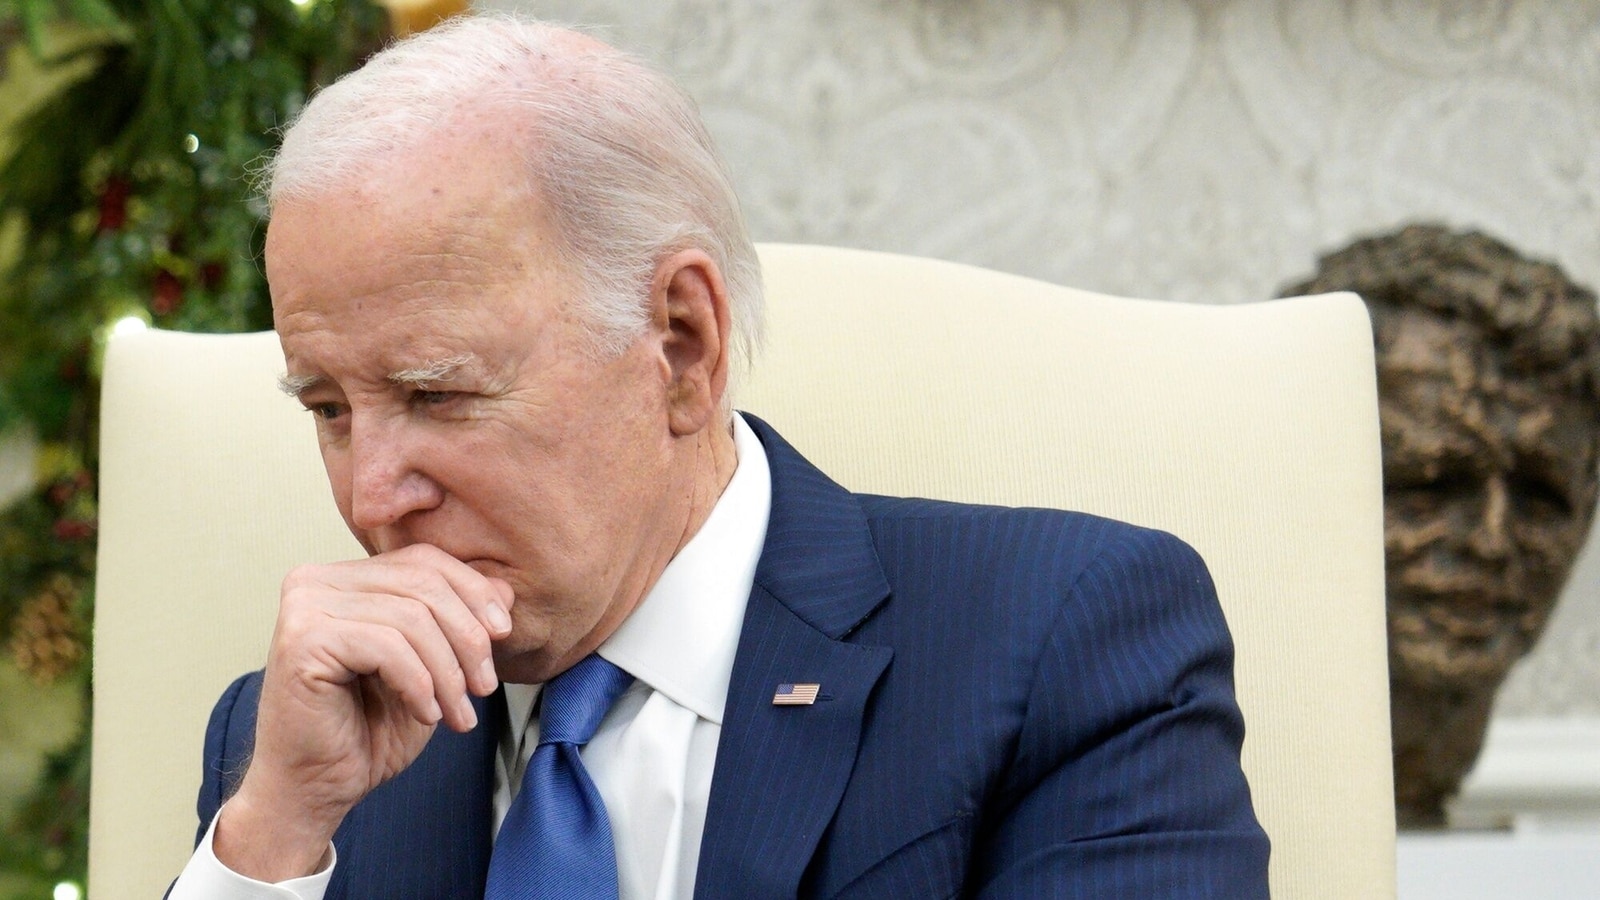 Biden claims ‘inflation has come down’ in US, X adds a ‘context’ to the tweet with many Americans wondering how